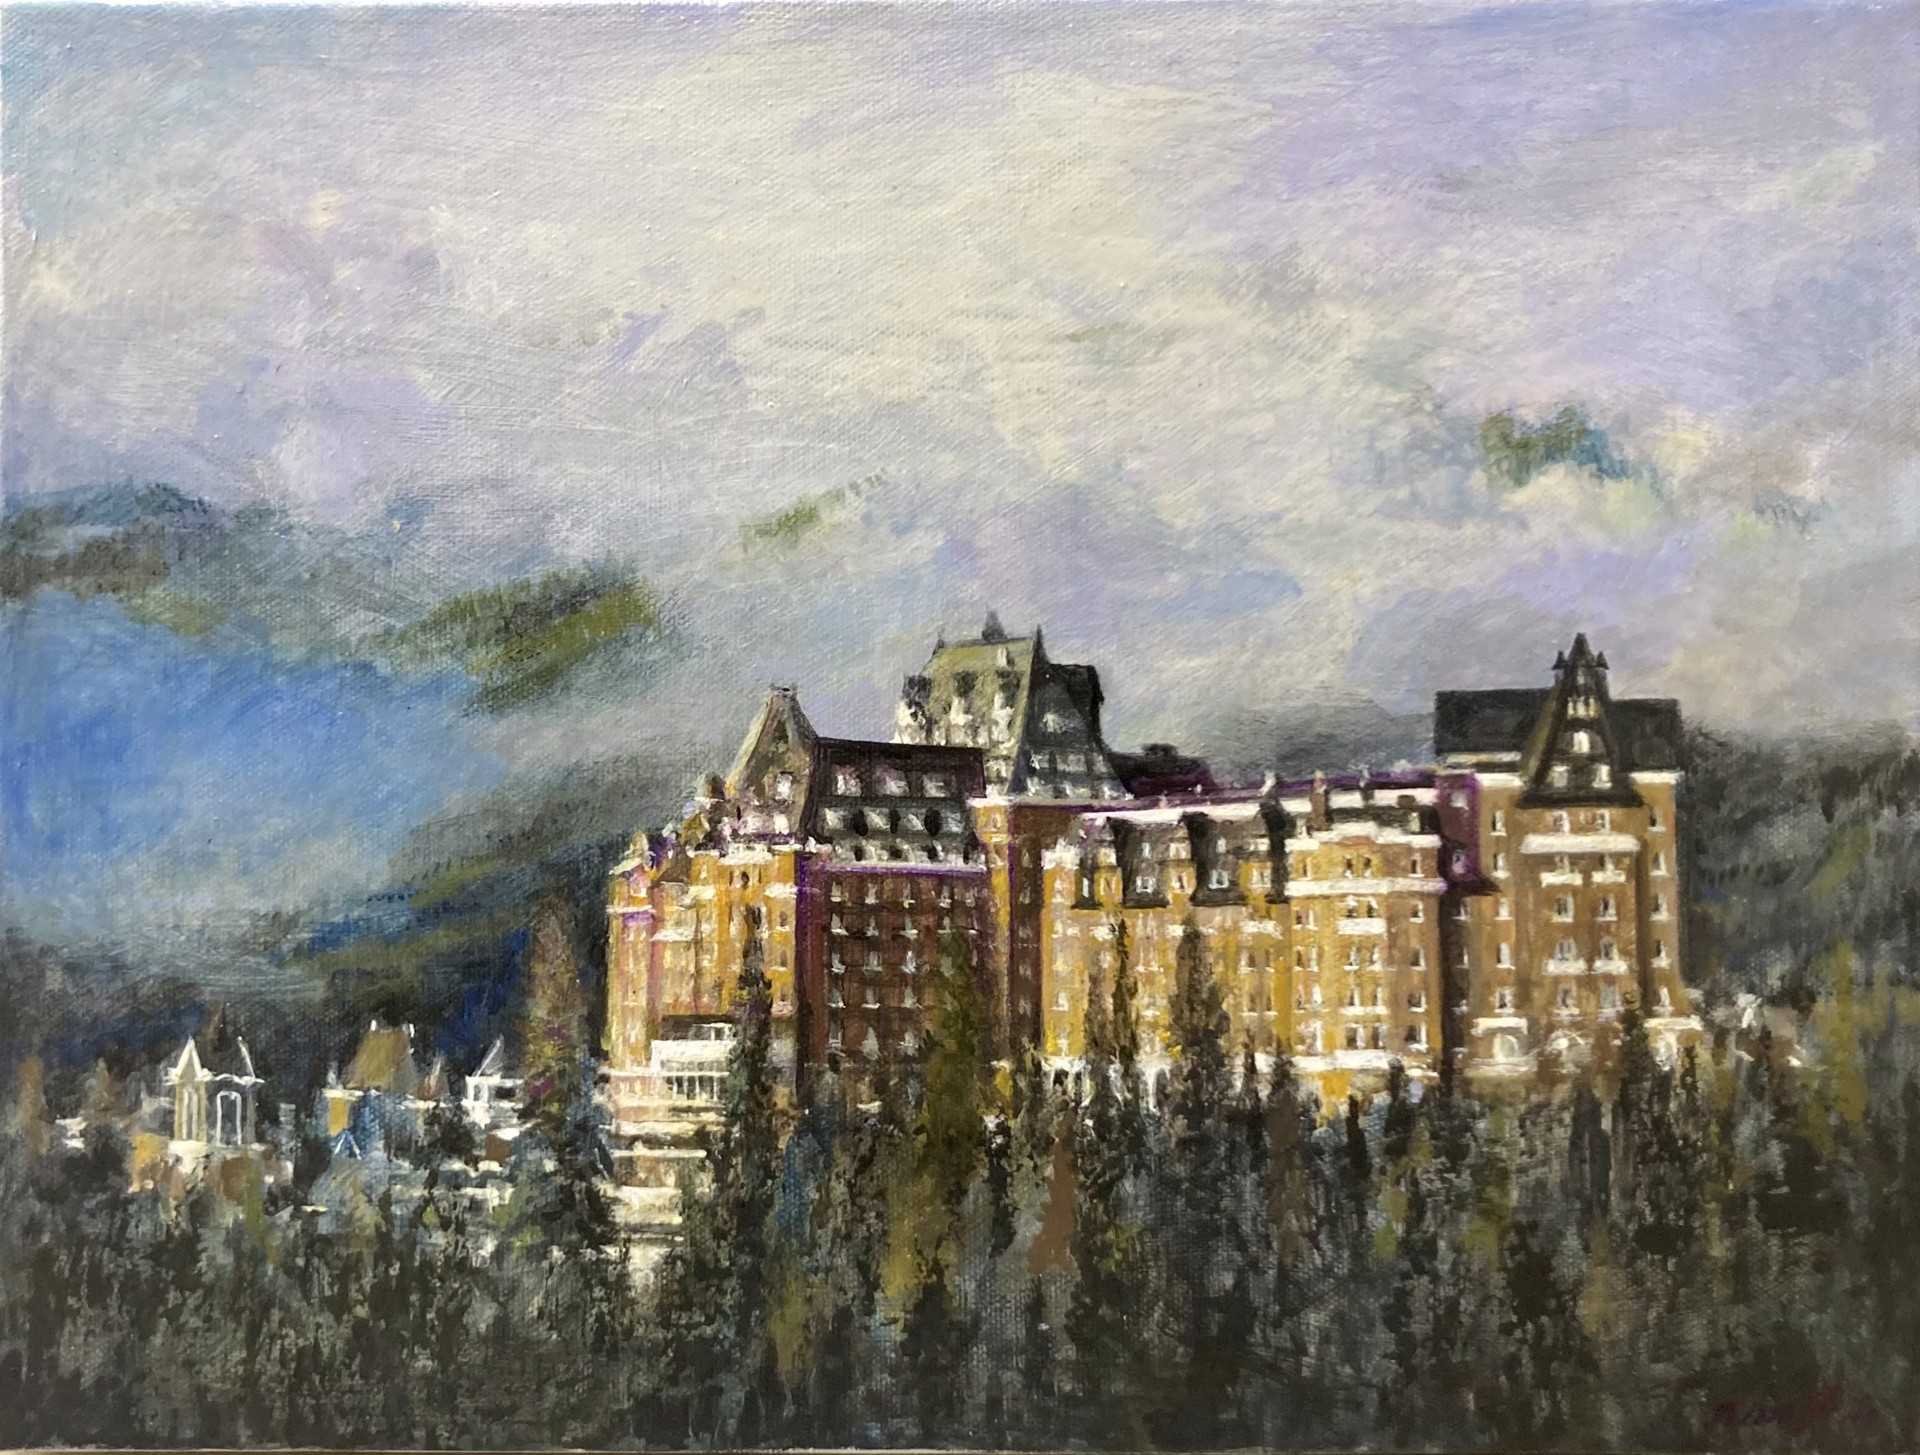 Cloudy Day at the Banff Springs by Rino Friio